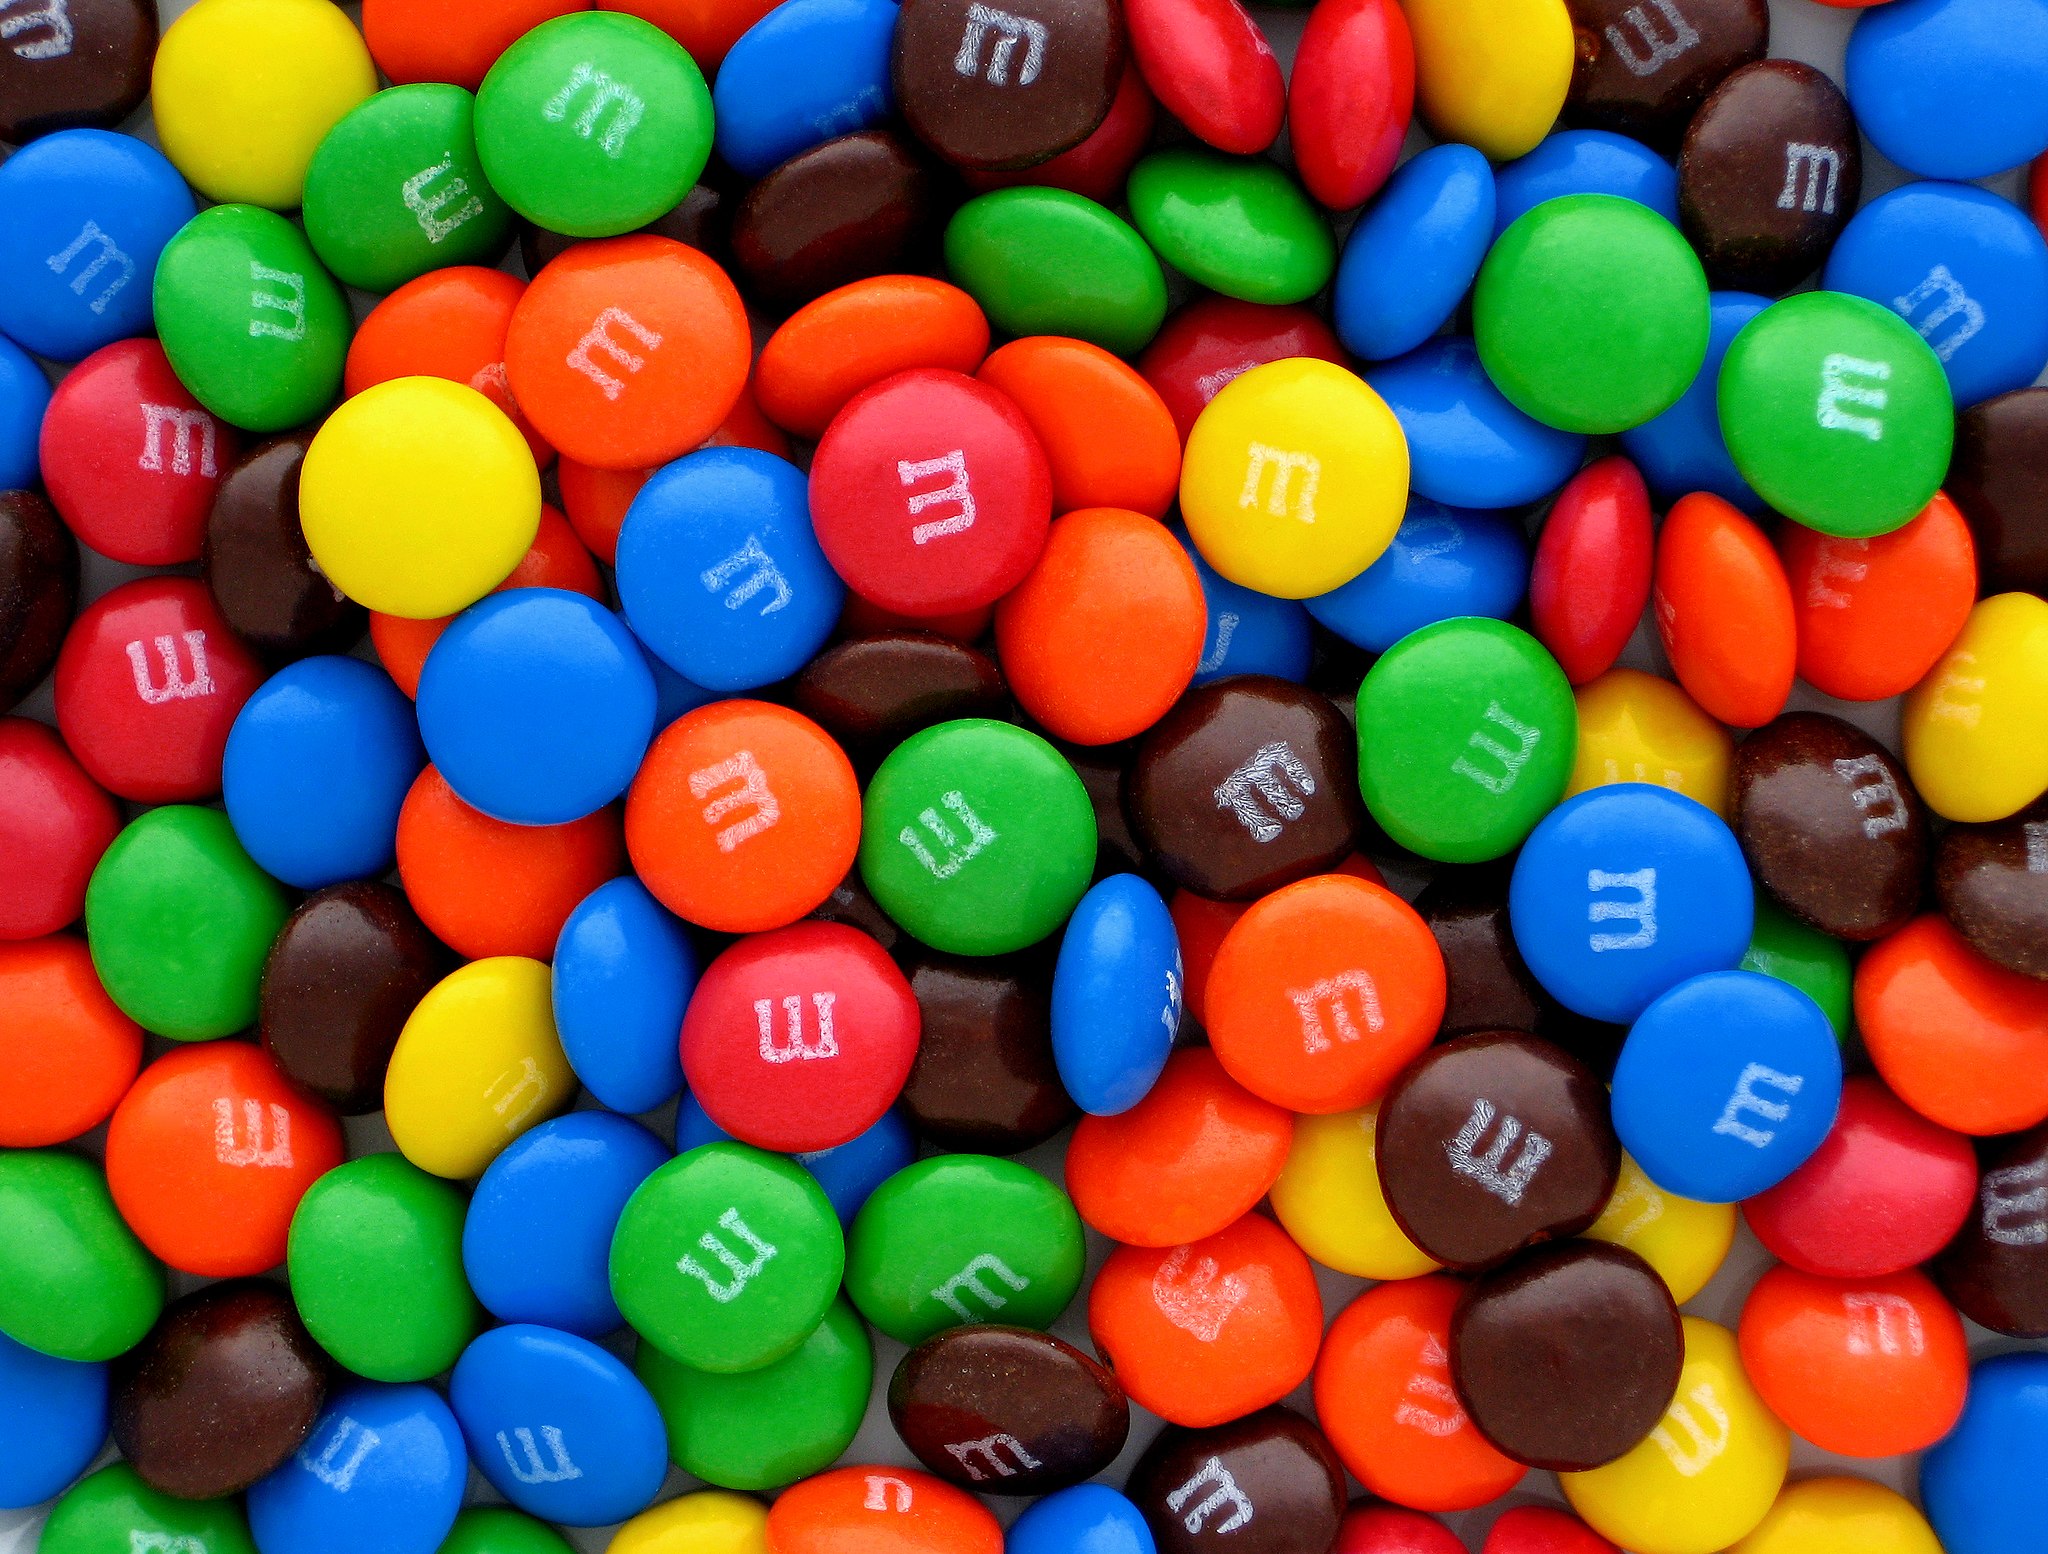 The popular chocolate candy morsel M&M's just announced they are adding a brand new color to the M&M candy mix.